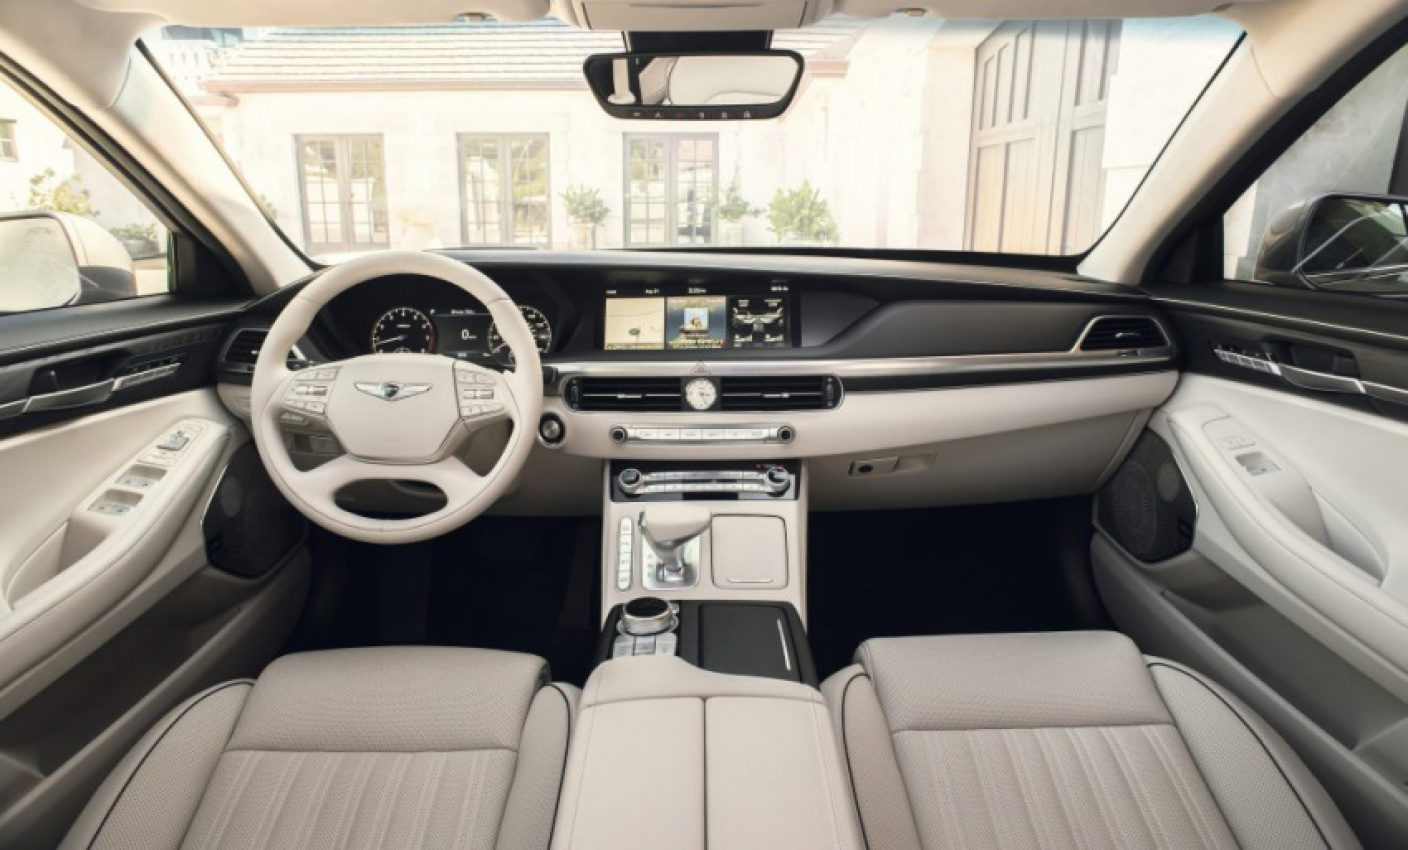 android, autos, cars, genesis, mercedes-benz, genesis g90, luxury cars, mercedes, s class, android, 2022 genesis g90 vs. 2022 mercedes s-class: can the luxury sedan upstart beat the king?